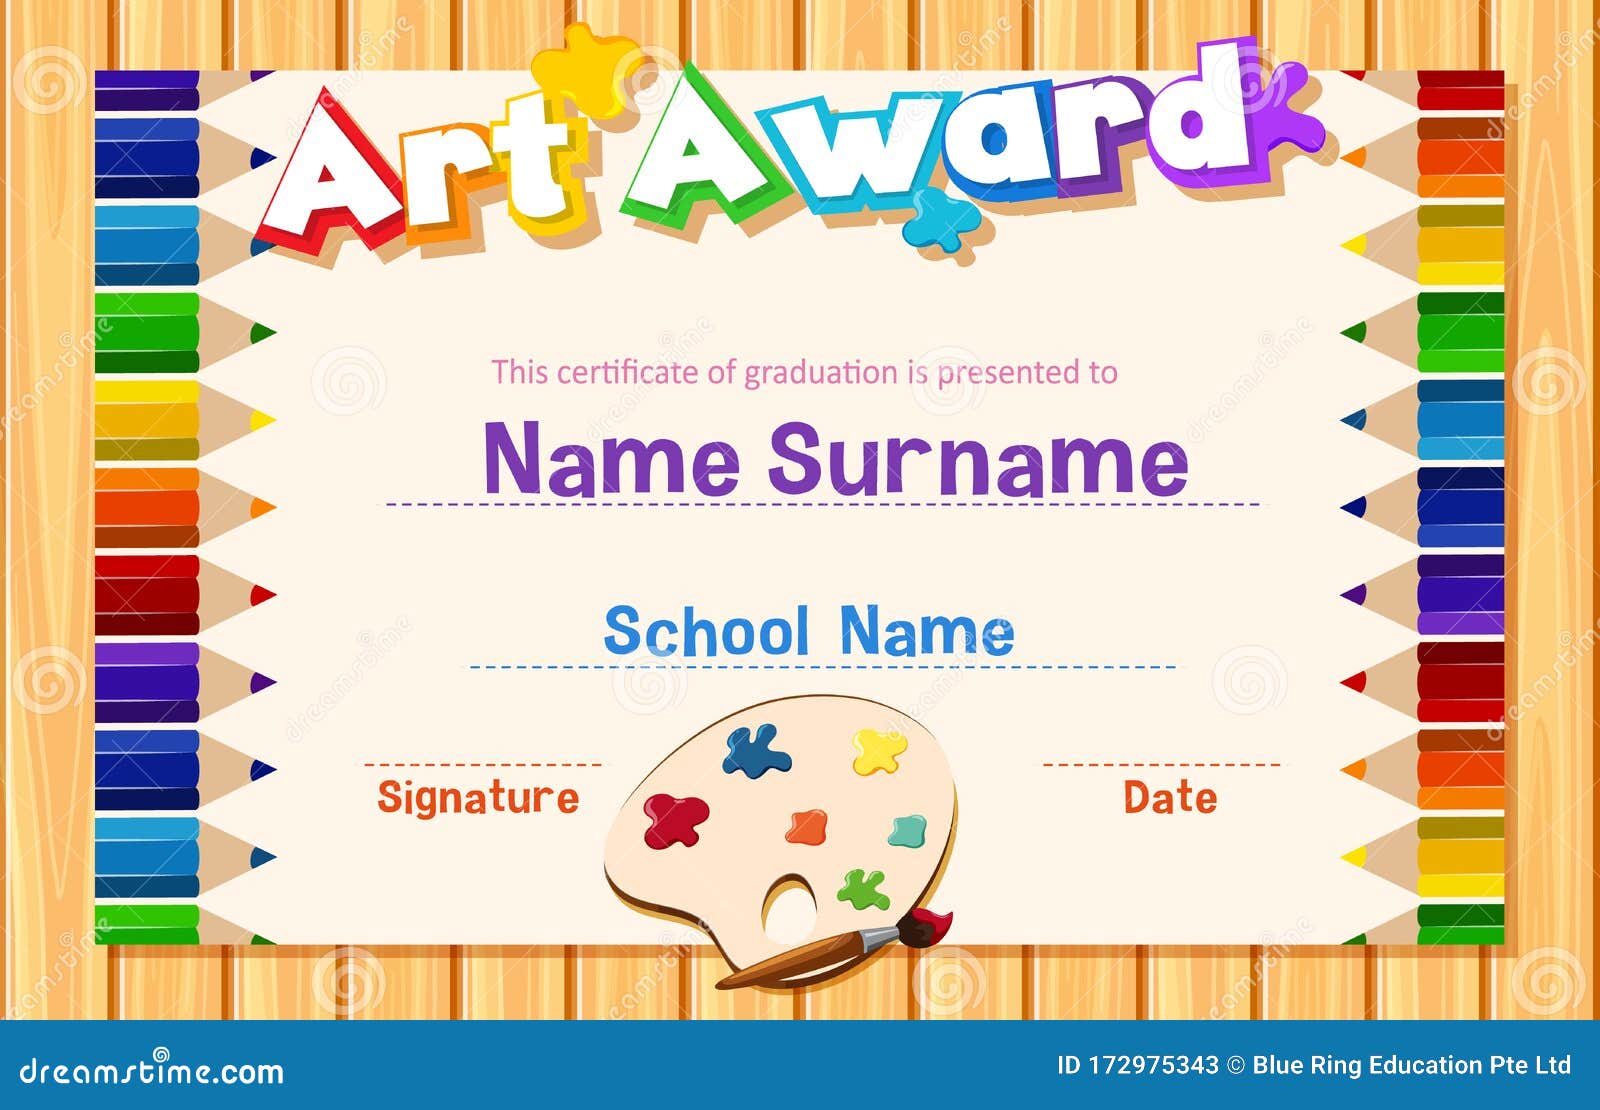 Certificate Template for Art Award with Color Pencils in With Art Certificate Template Free